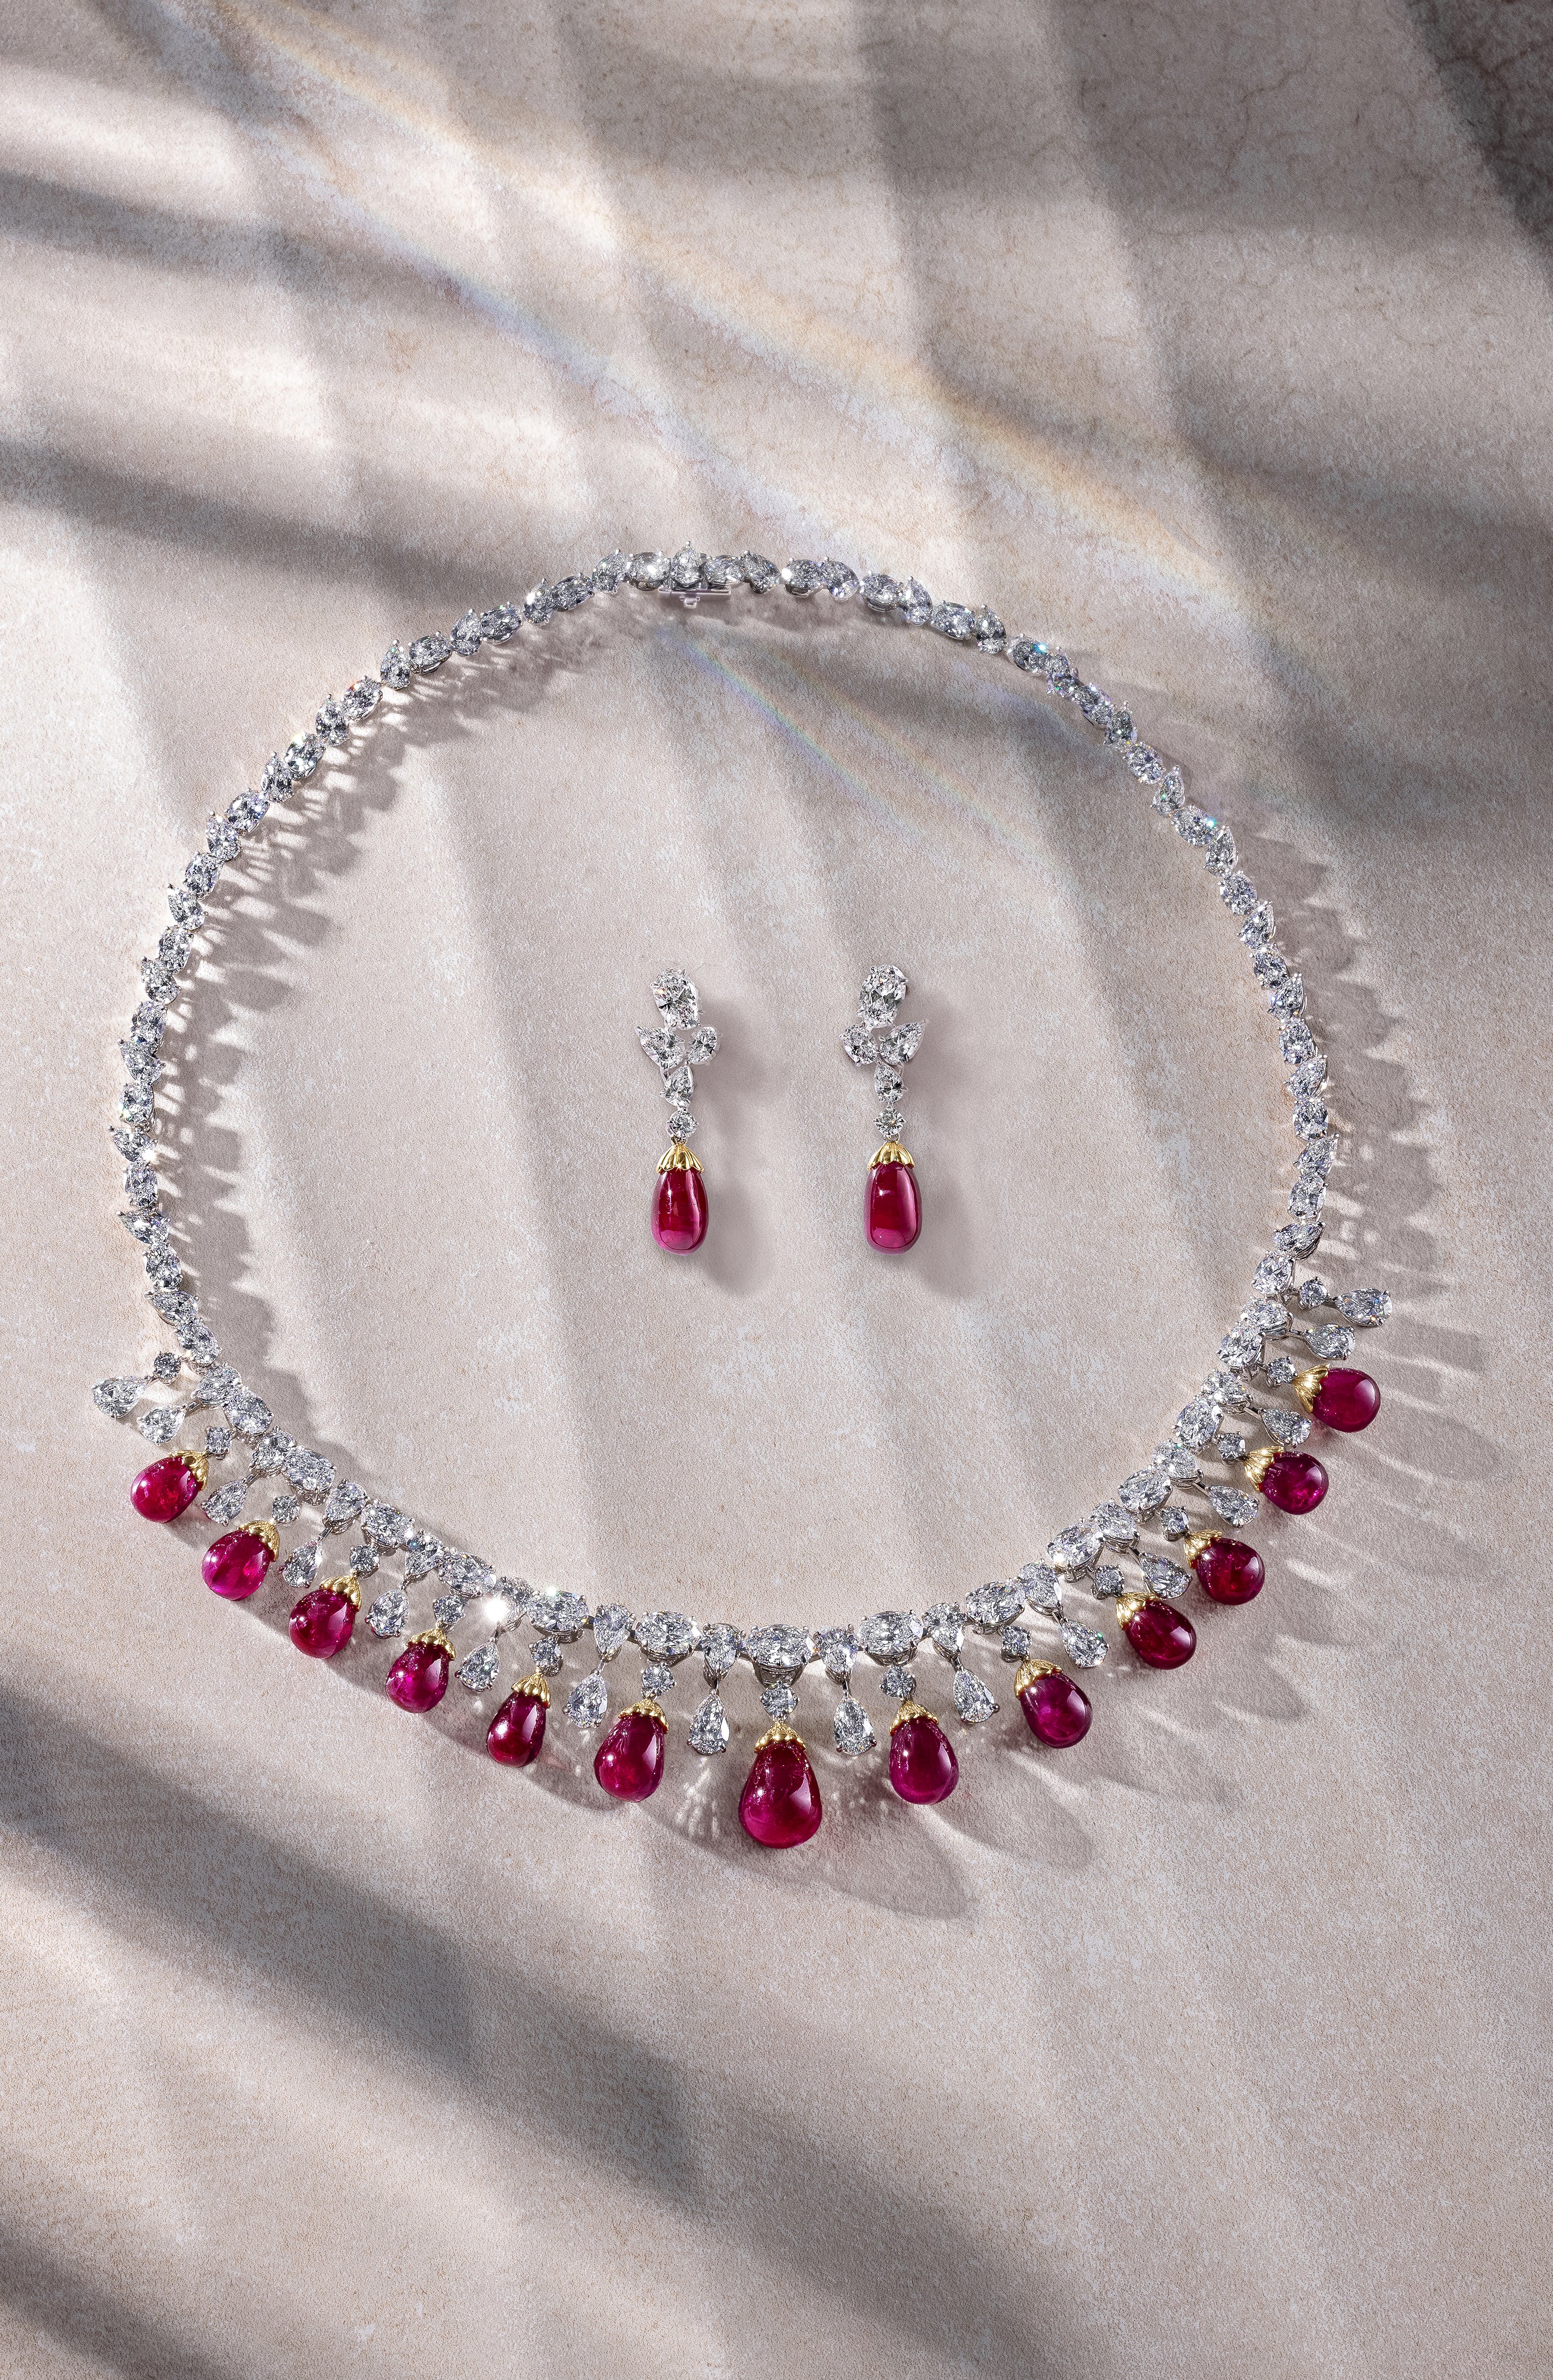 Diamond and Ruby Necklace & Earring Set from Dehres